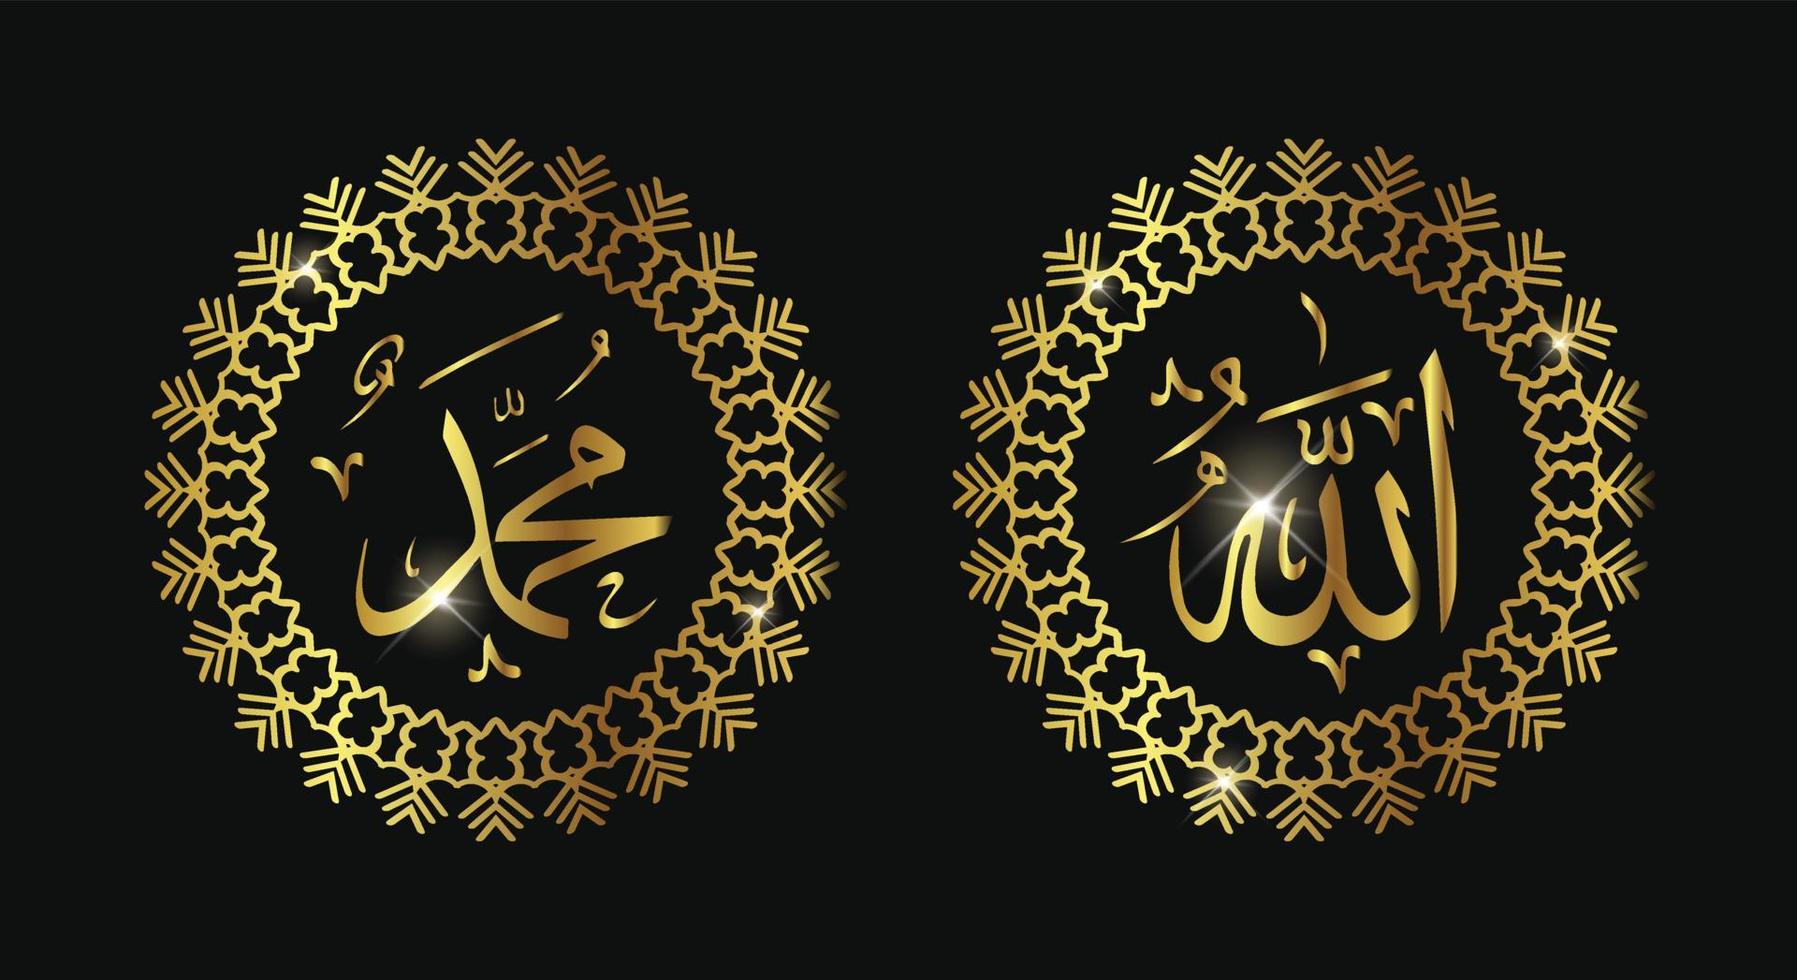 Islamic calligraphic Name of God And Name of Prophet Muhamad with gold color or luxury color vector